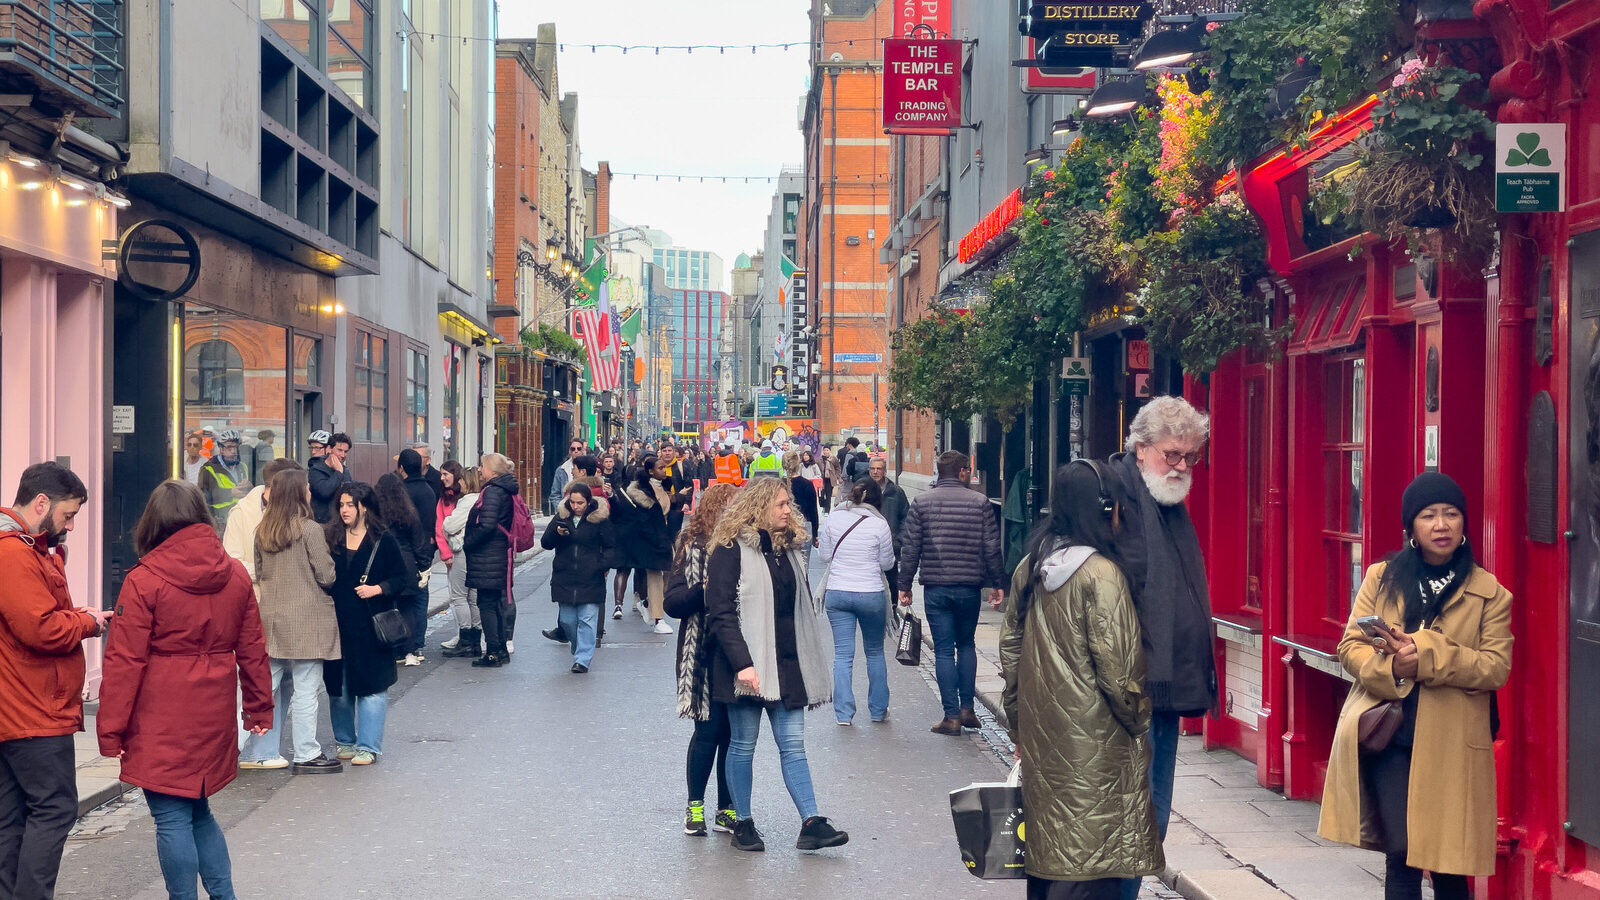 VISITING DUBLIN FOR ST PATRICK'S WEEKEND [IS TEMPLE BAR AS GOOD AS MANY CLAIM IT TO BE?]-229478-1